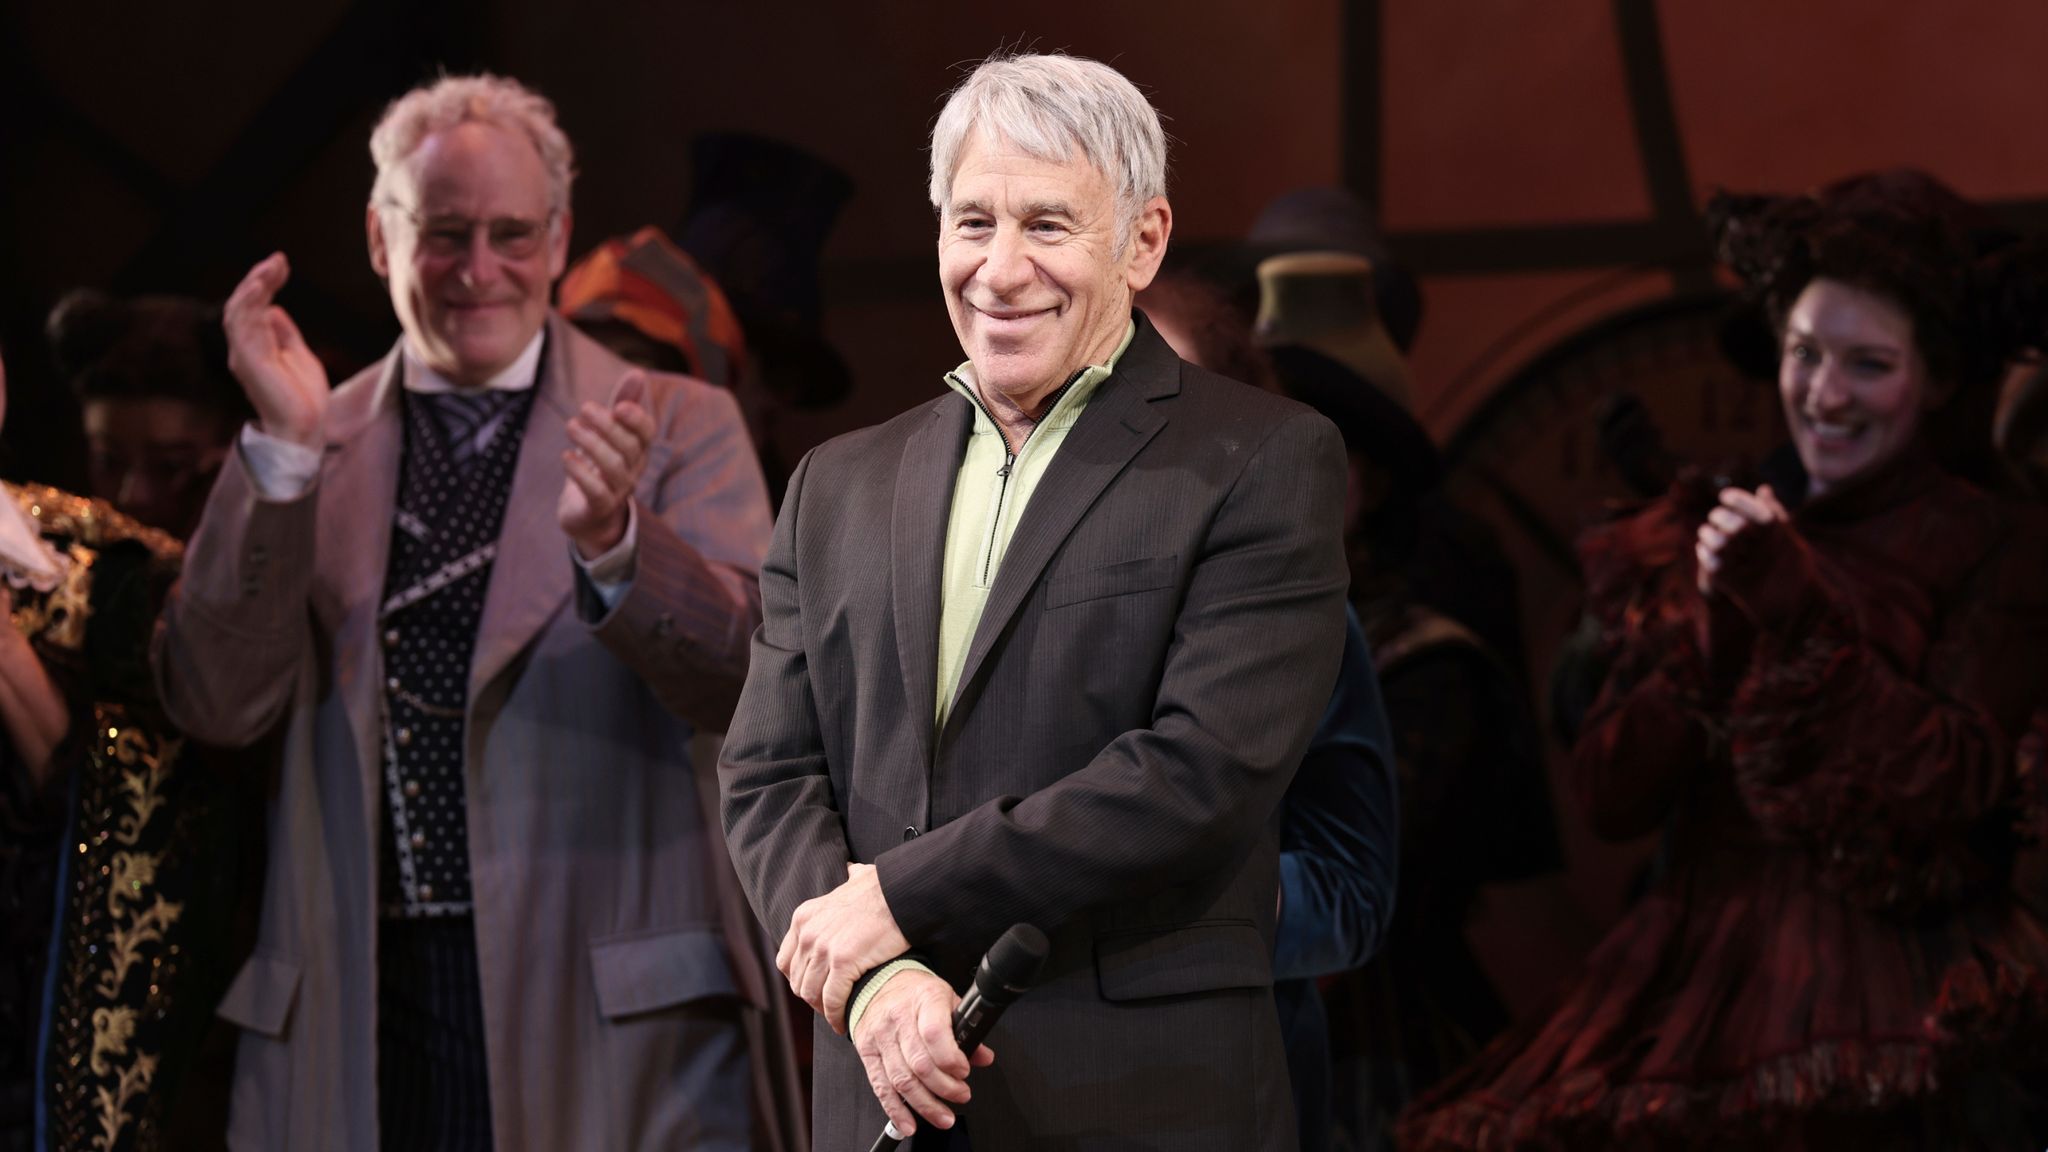 Stephen Schwartz participates in the curtain call during the 20th anniversary performance of "Wicked" on Monday, Oct. 30, 2023, at Gershwin Theater in New York. (Photo by CJ Rivera/Invision/AP)